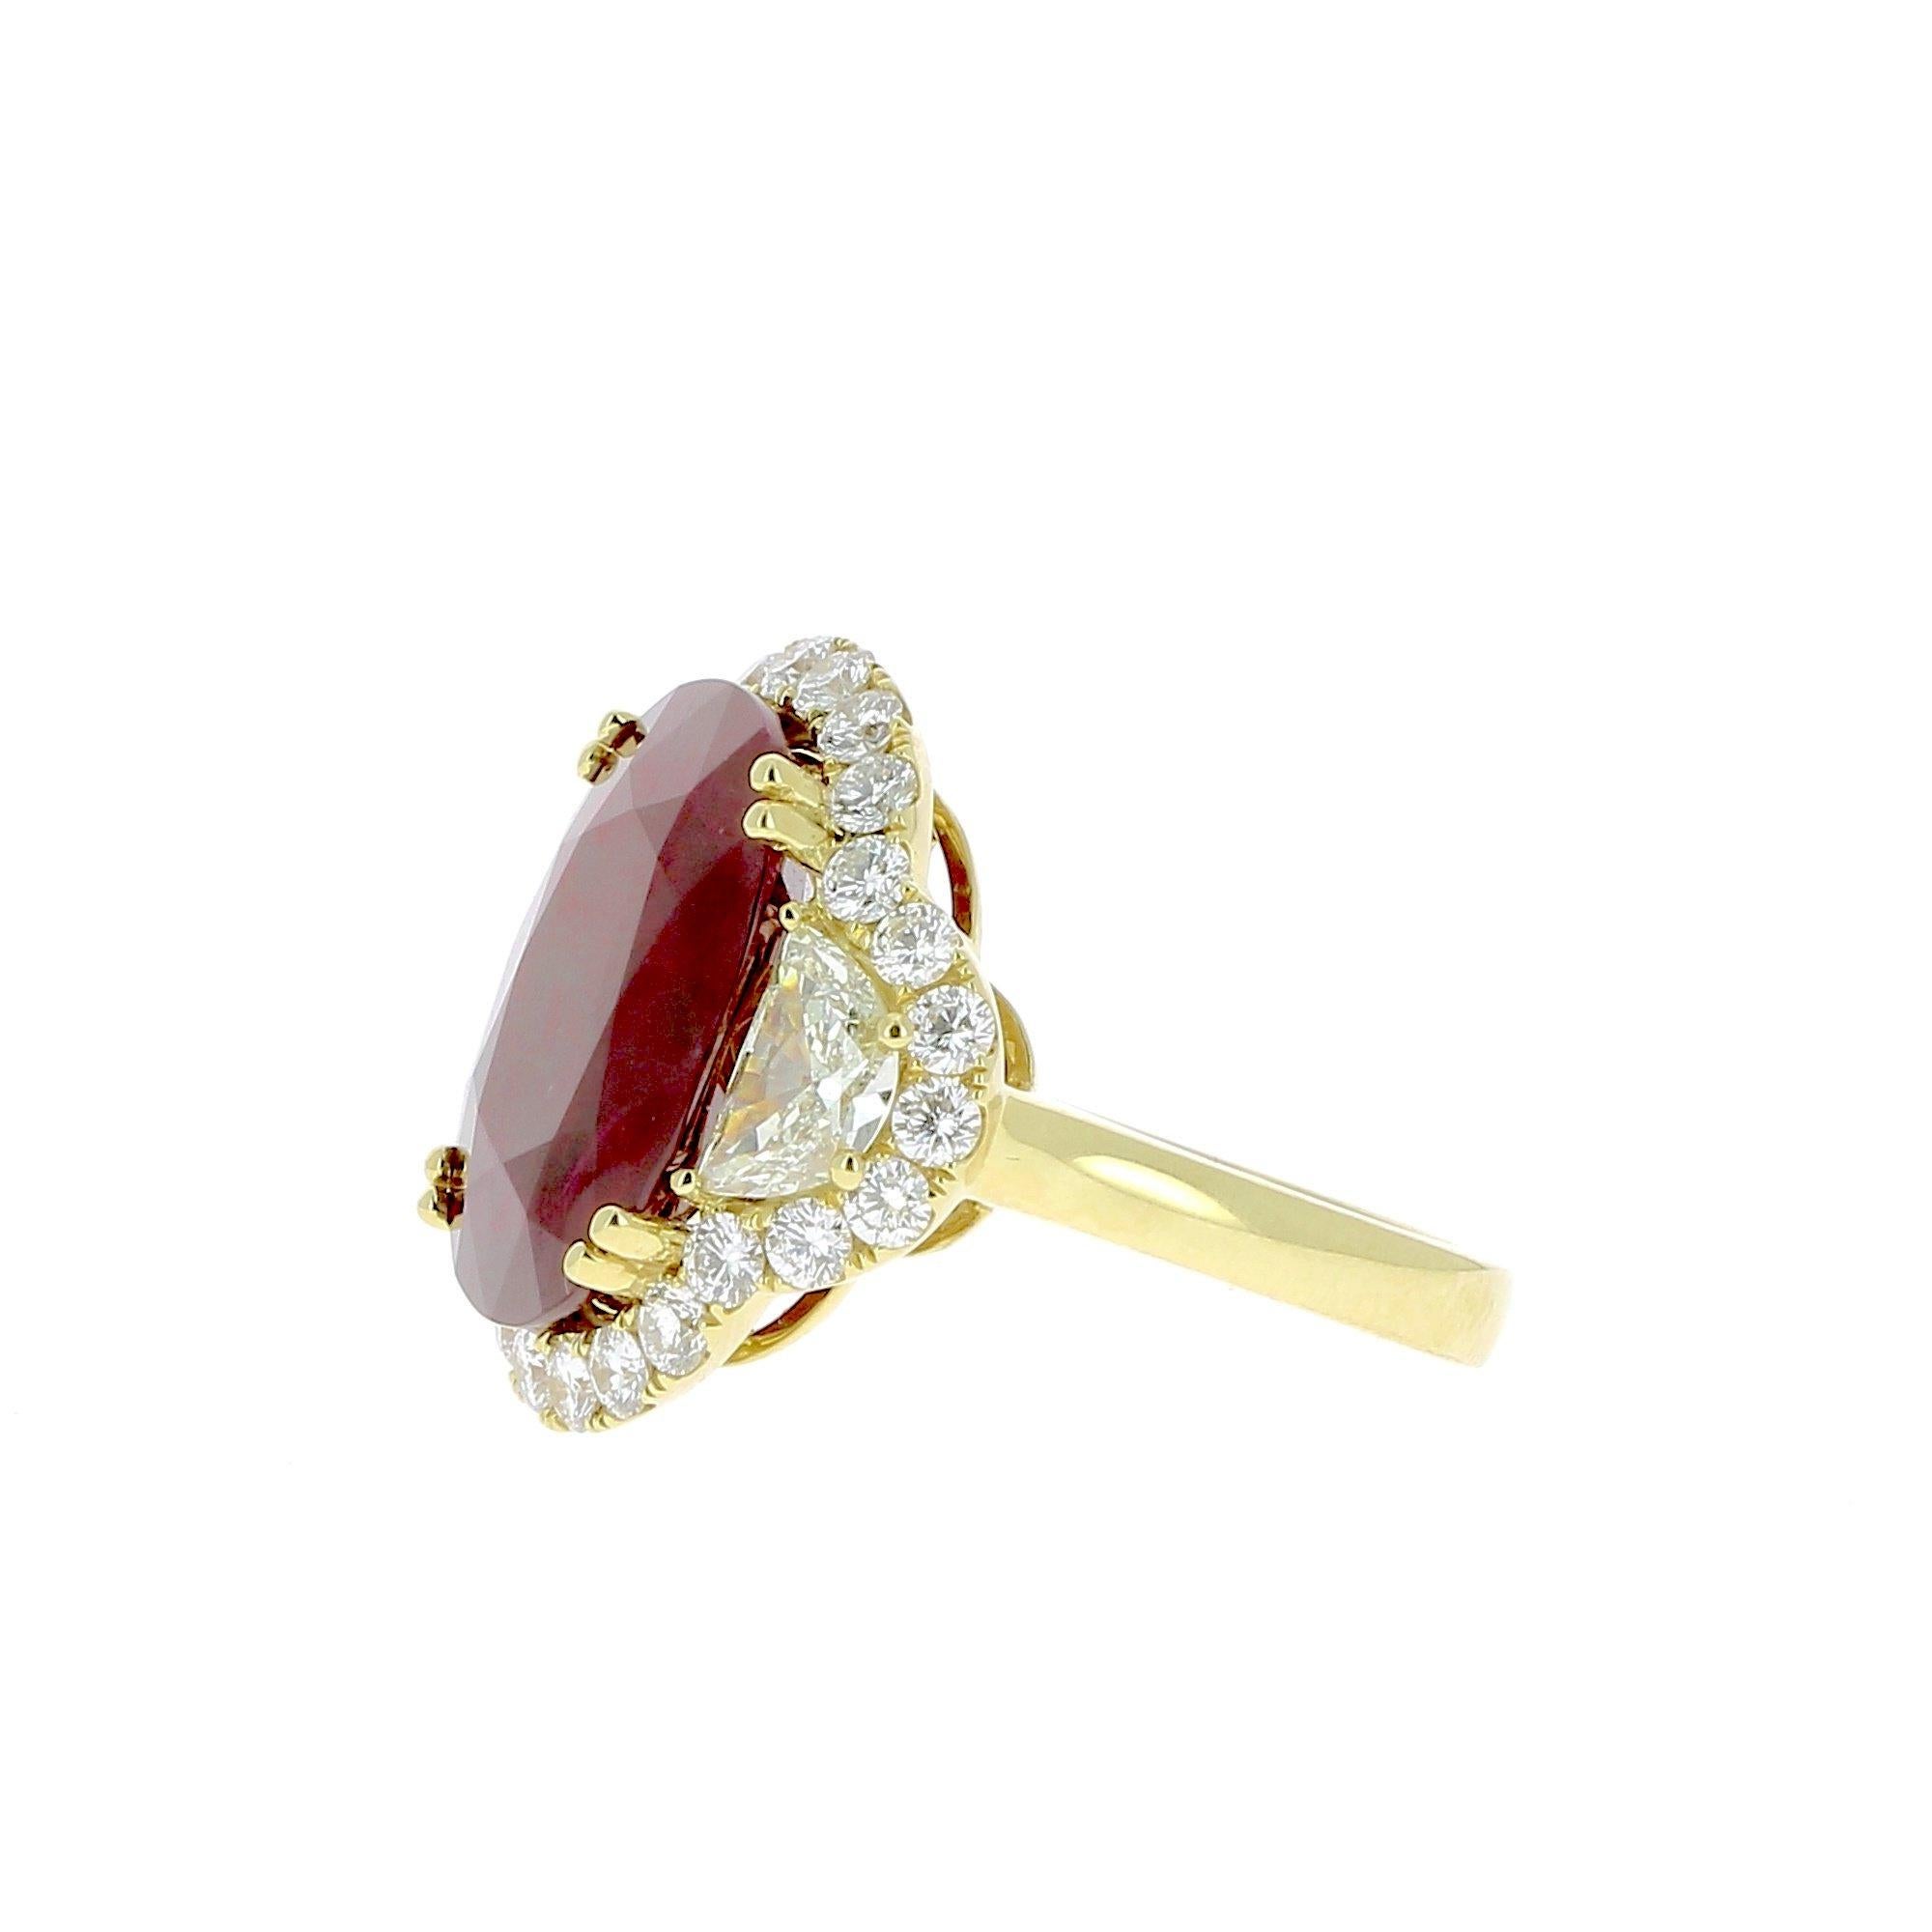 Oval Cut 12.52 Carat Oval Natural Ruby Cocktail Ring Half-Moon Diamonds 18K Yellow Gold 